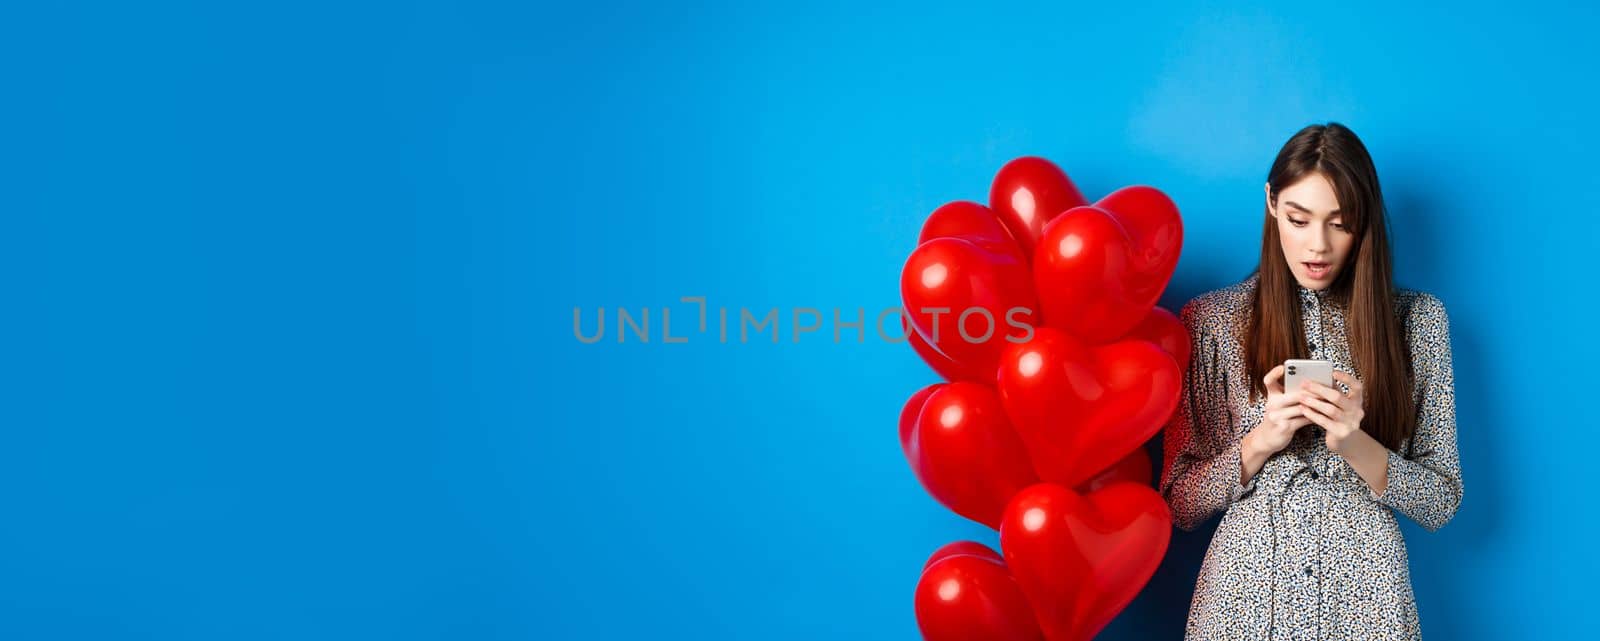 Valentines day. Portrait of young woman standing near red romantic balloons, looking surprised at smartphone screen, blue background.